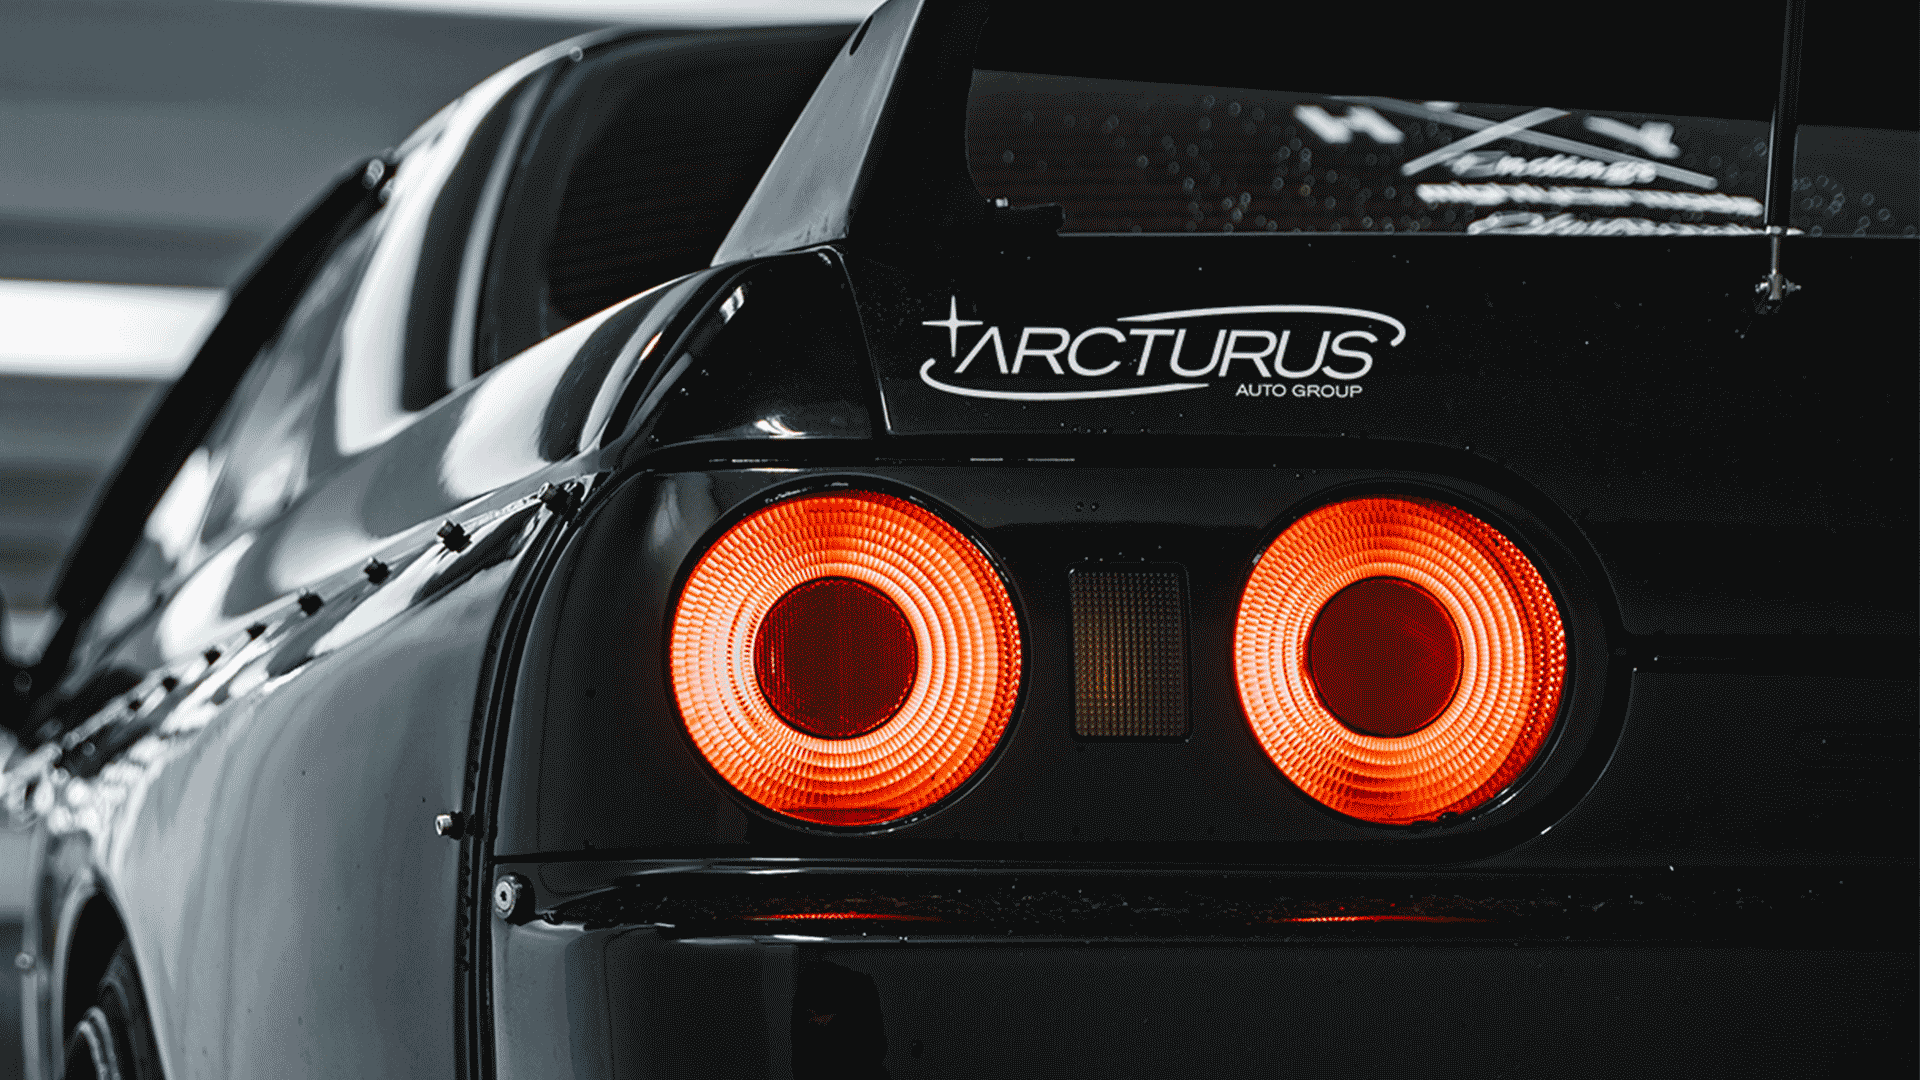 A GIF showing a mock-up of a Nissan R32 GTR with an Arcturus sticker on the left rear, and a mock-up of front and rear windshield stickers on different makes of cars.